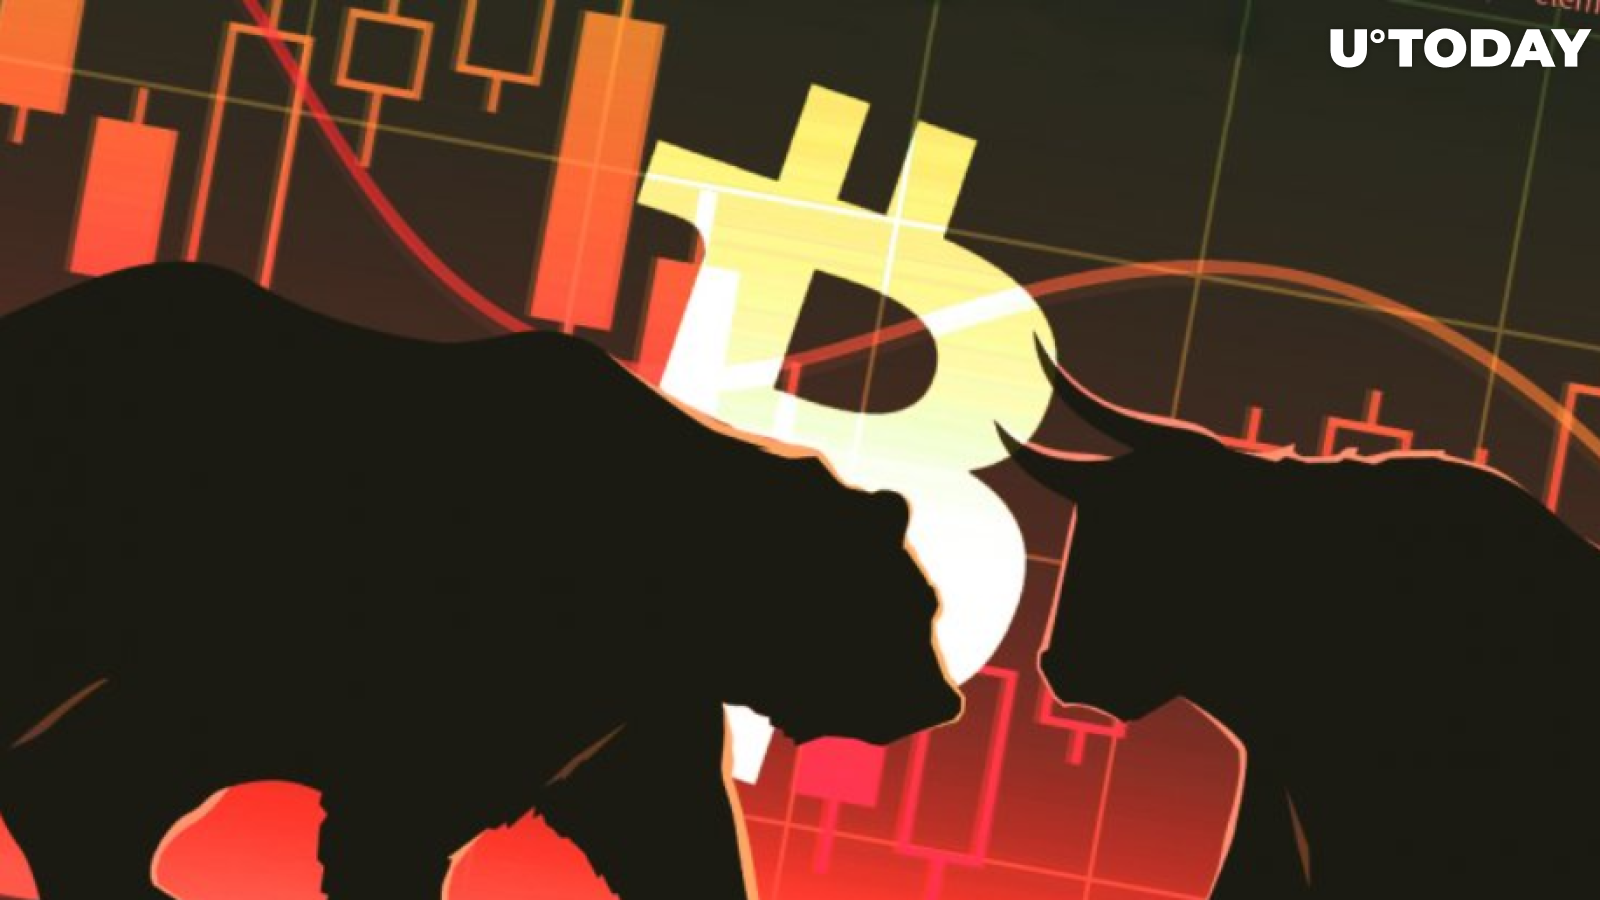 Bitcoin Price Is Not In Bull Territory Yet: Stock-to-Flow Model Creator